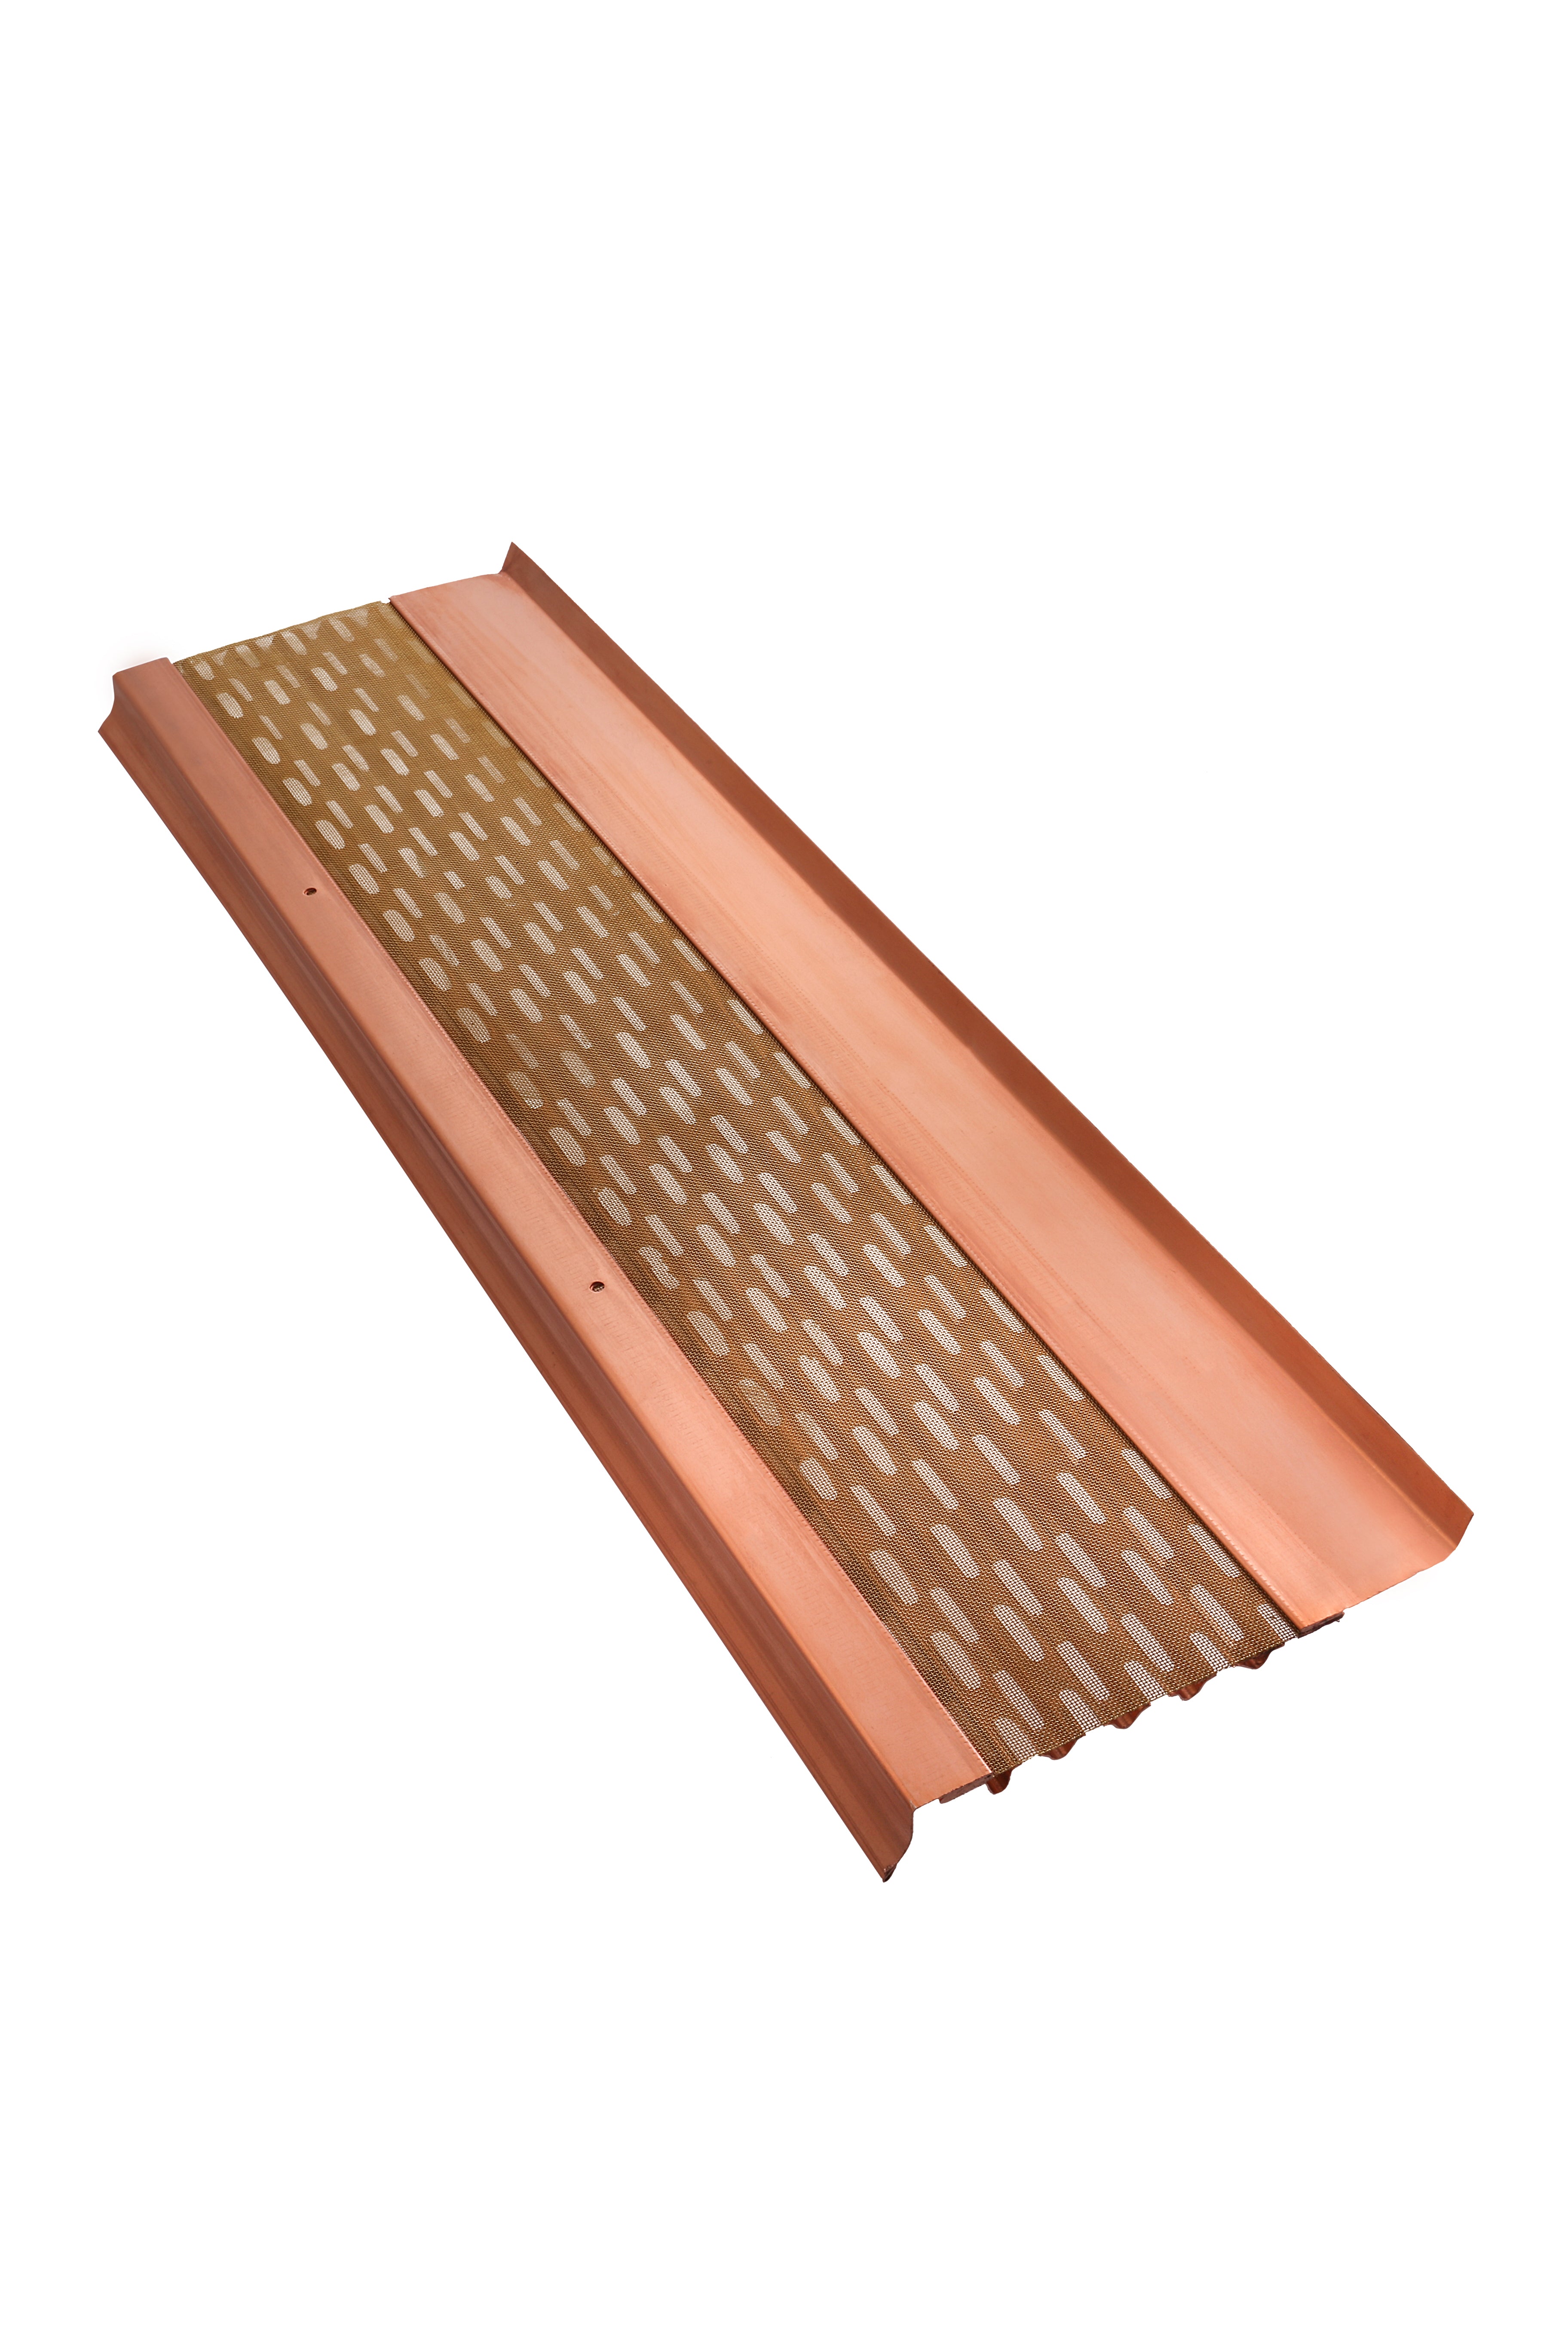 6"copper gutters. 6"k-style-Gutter,Types Styles.Gutter Guards for 6" half round copper gutter systems installed to fit top of your gutters Fully compatible with copper gutters. All Gutter Types & Styles.#1 MANUFACTURING